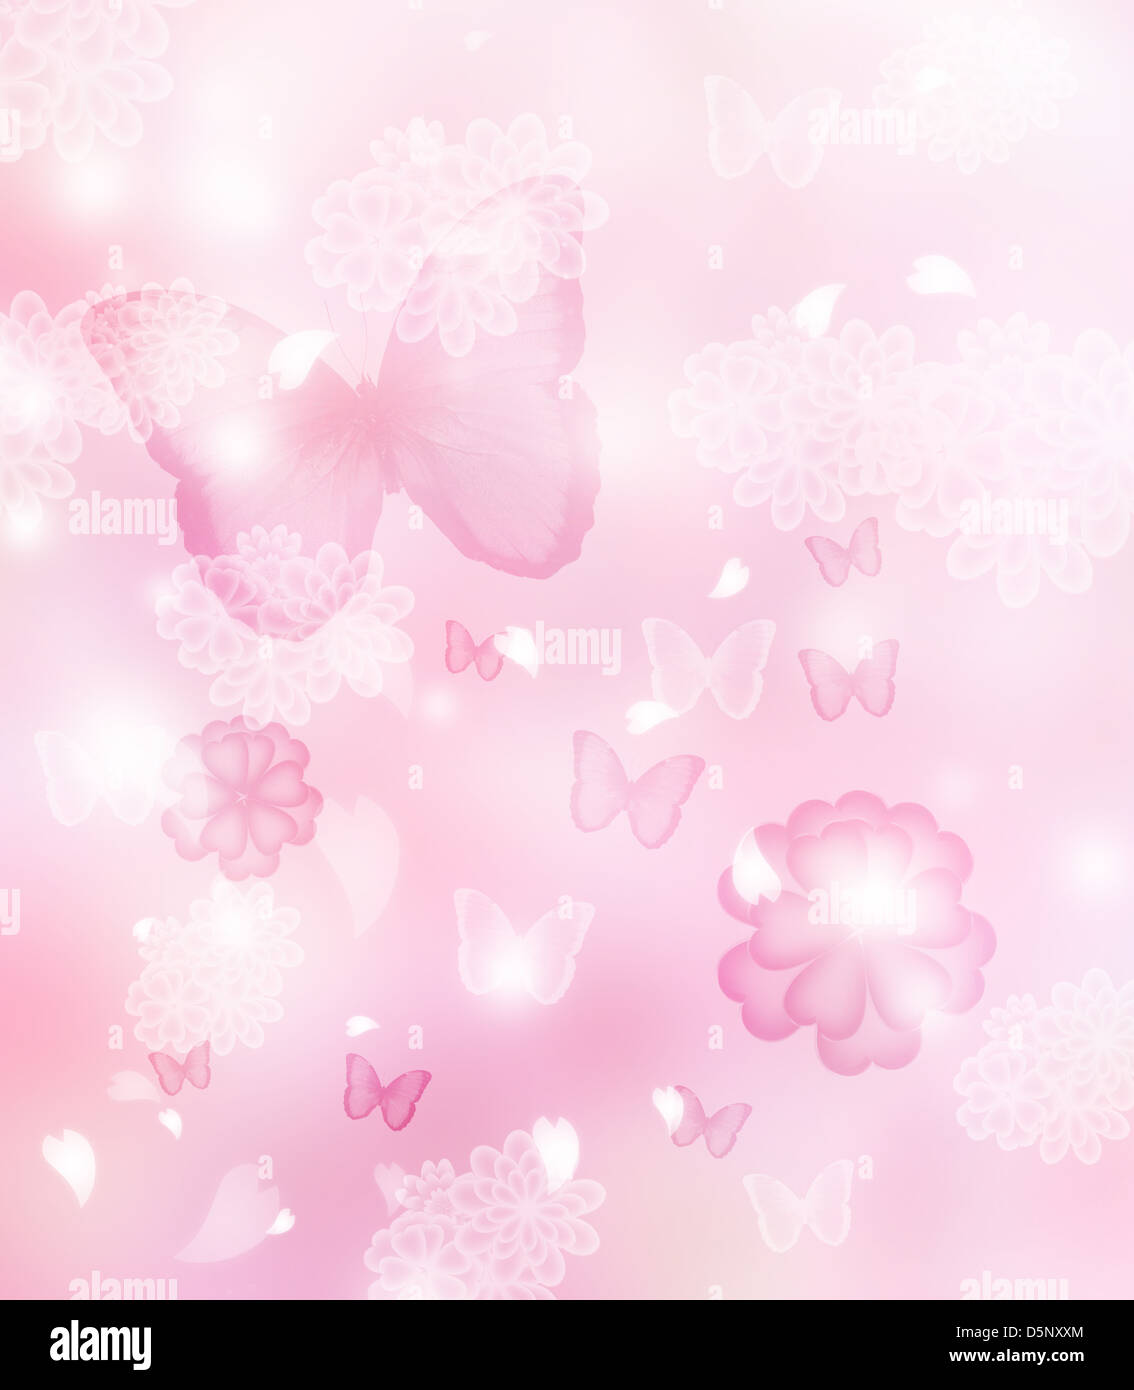 Blossoms and butterflies pastel pink illustration Stock Photo